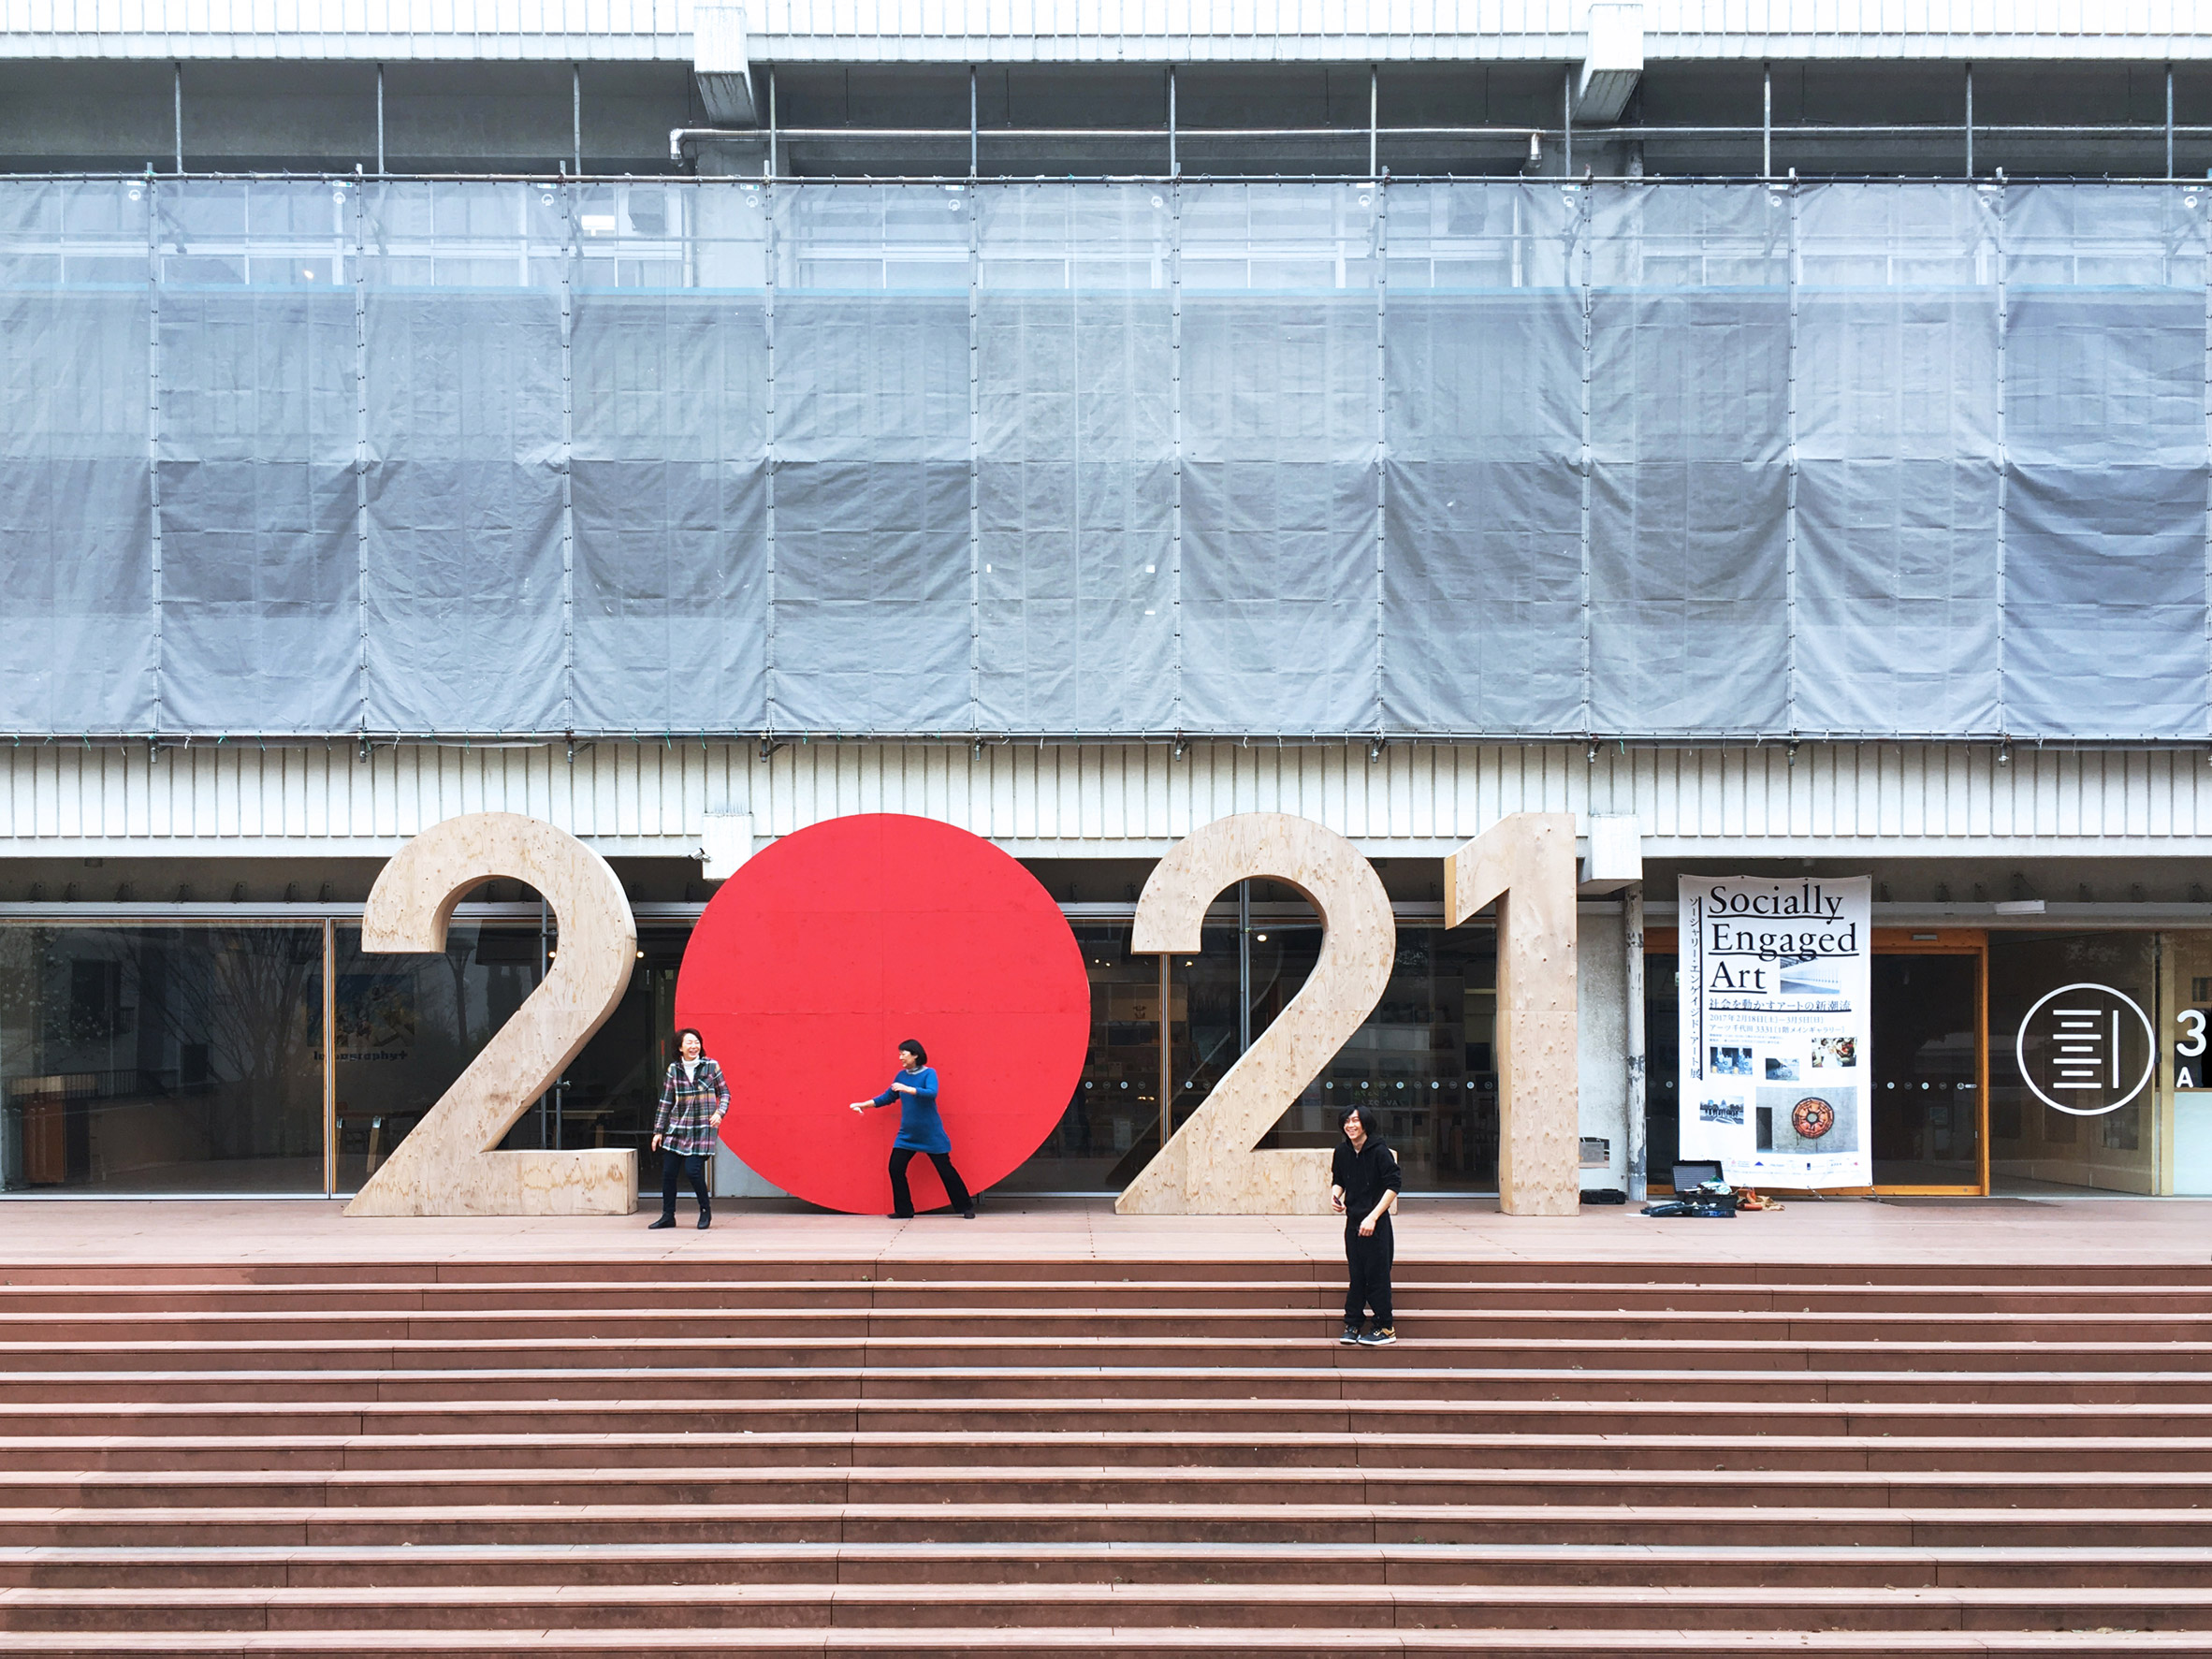 Giant mirrored ball installed in Tokyo office to encourage city to think beyond 2020 Olympics